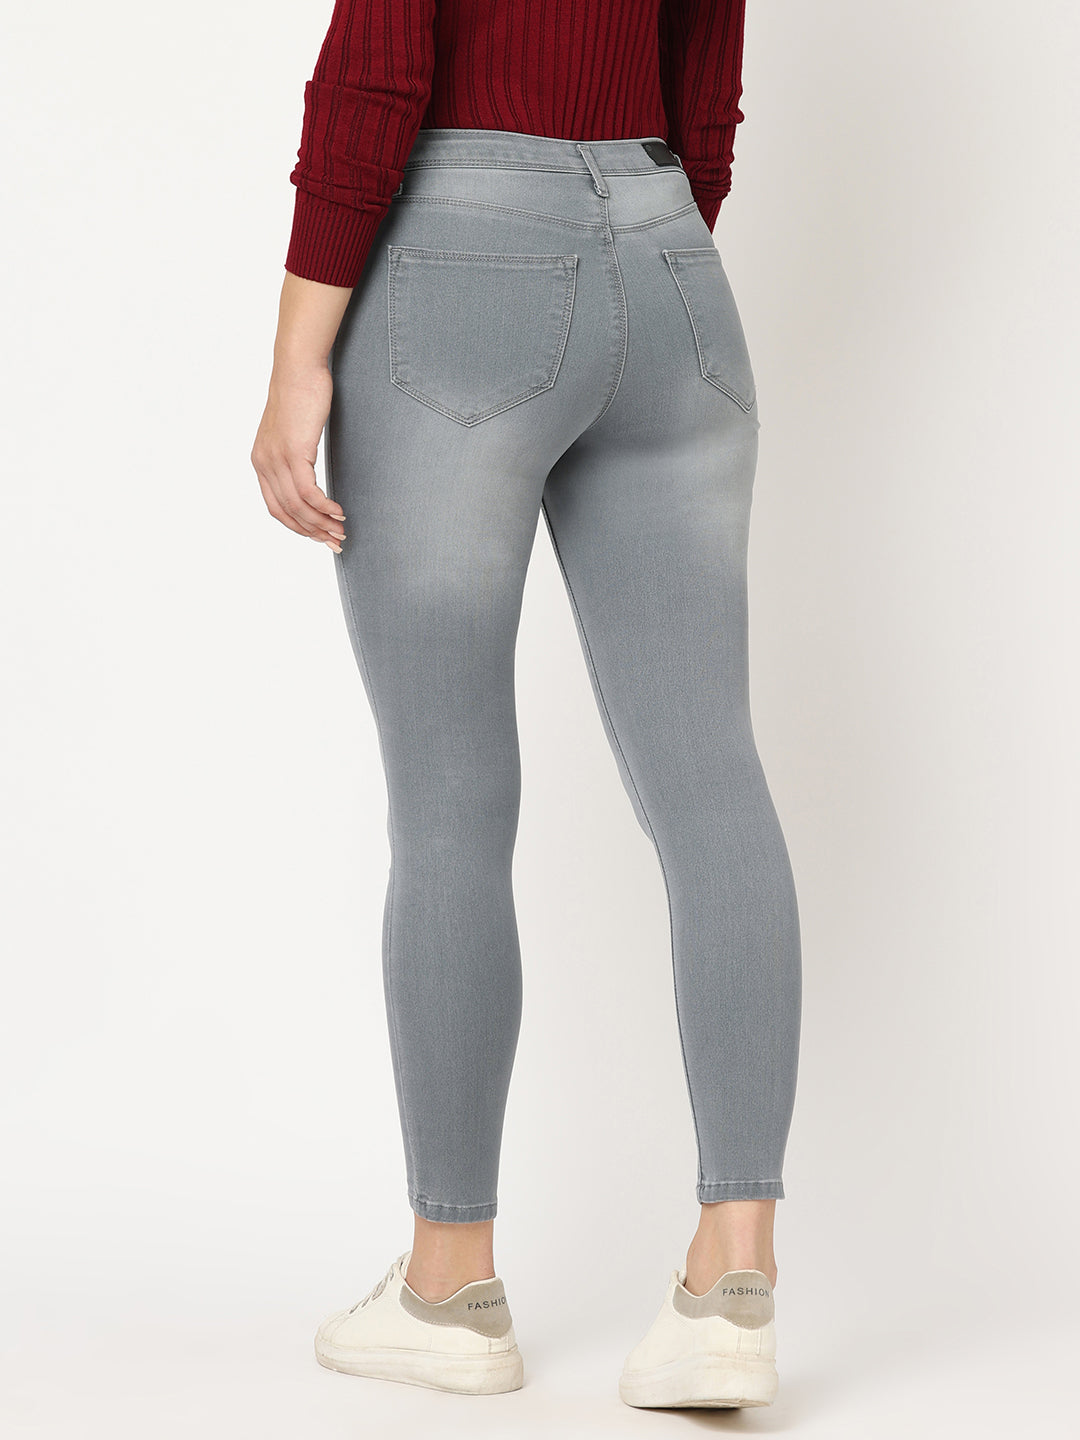 Highrise Skinny Grey Jeans